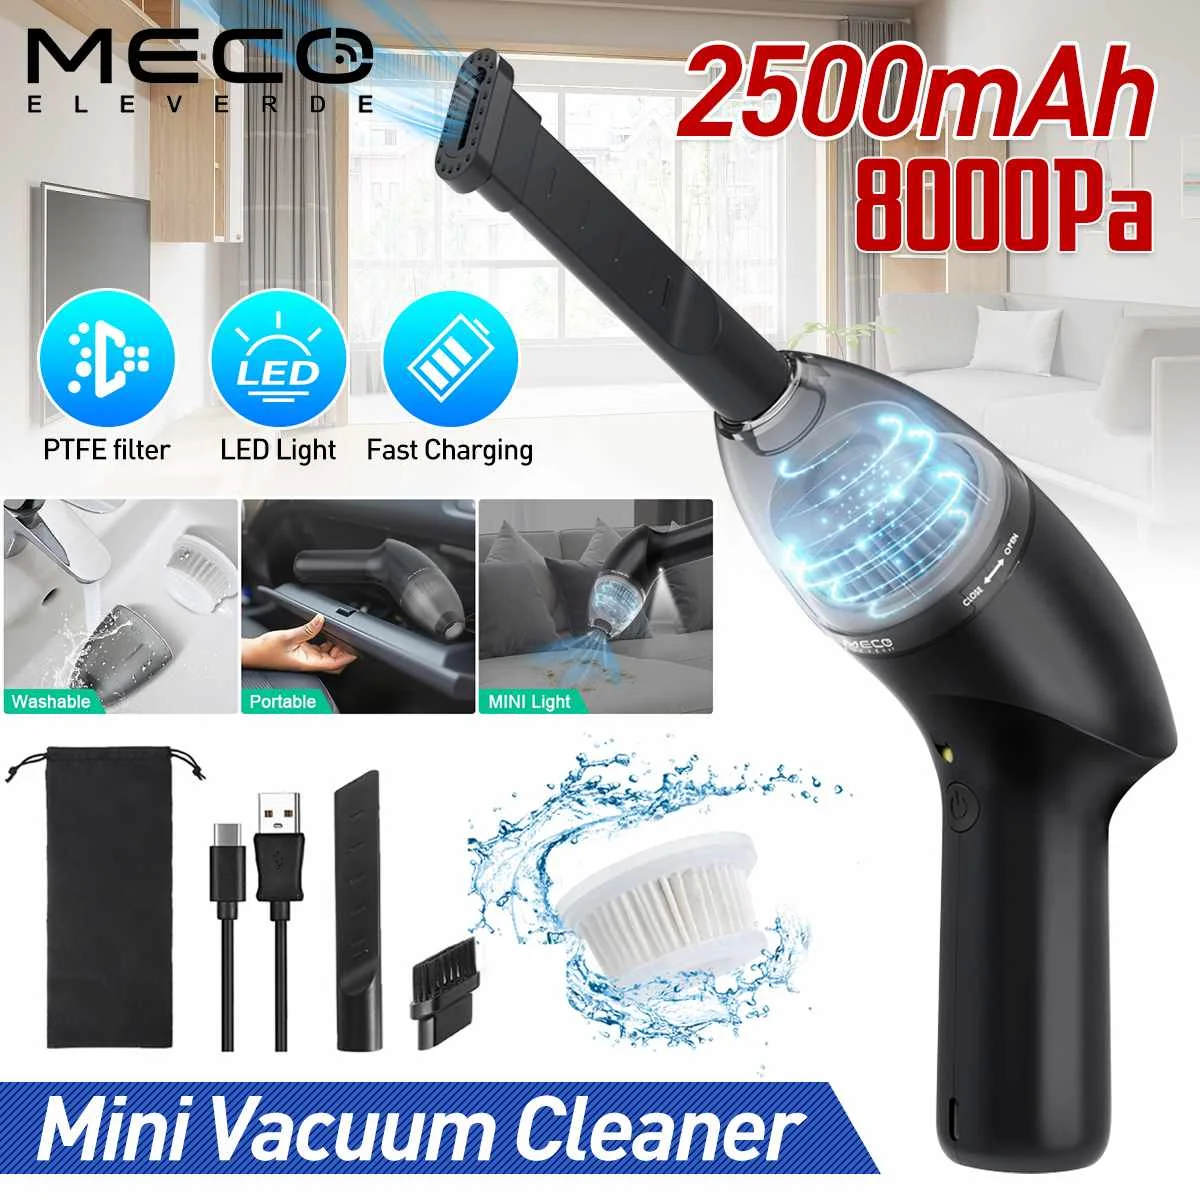 

MECO 8000Pa Mini Vacuum Cleaner Keyboard Cleaner Cordless Handheld Compressed Desk Cleaning Machine with LED Light Dust Hairs